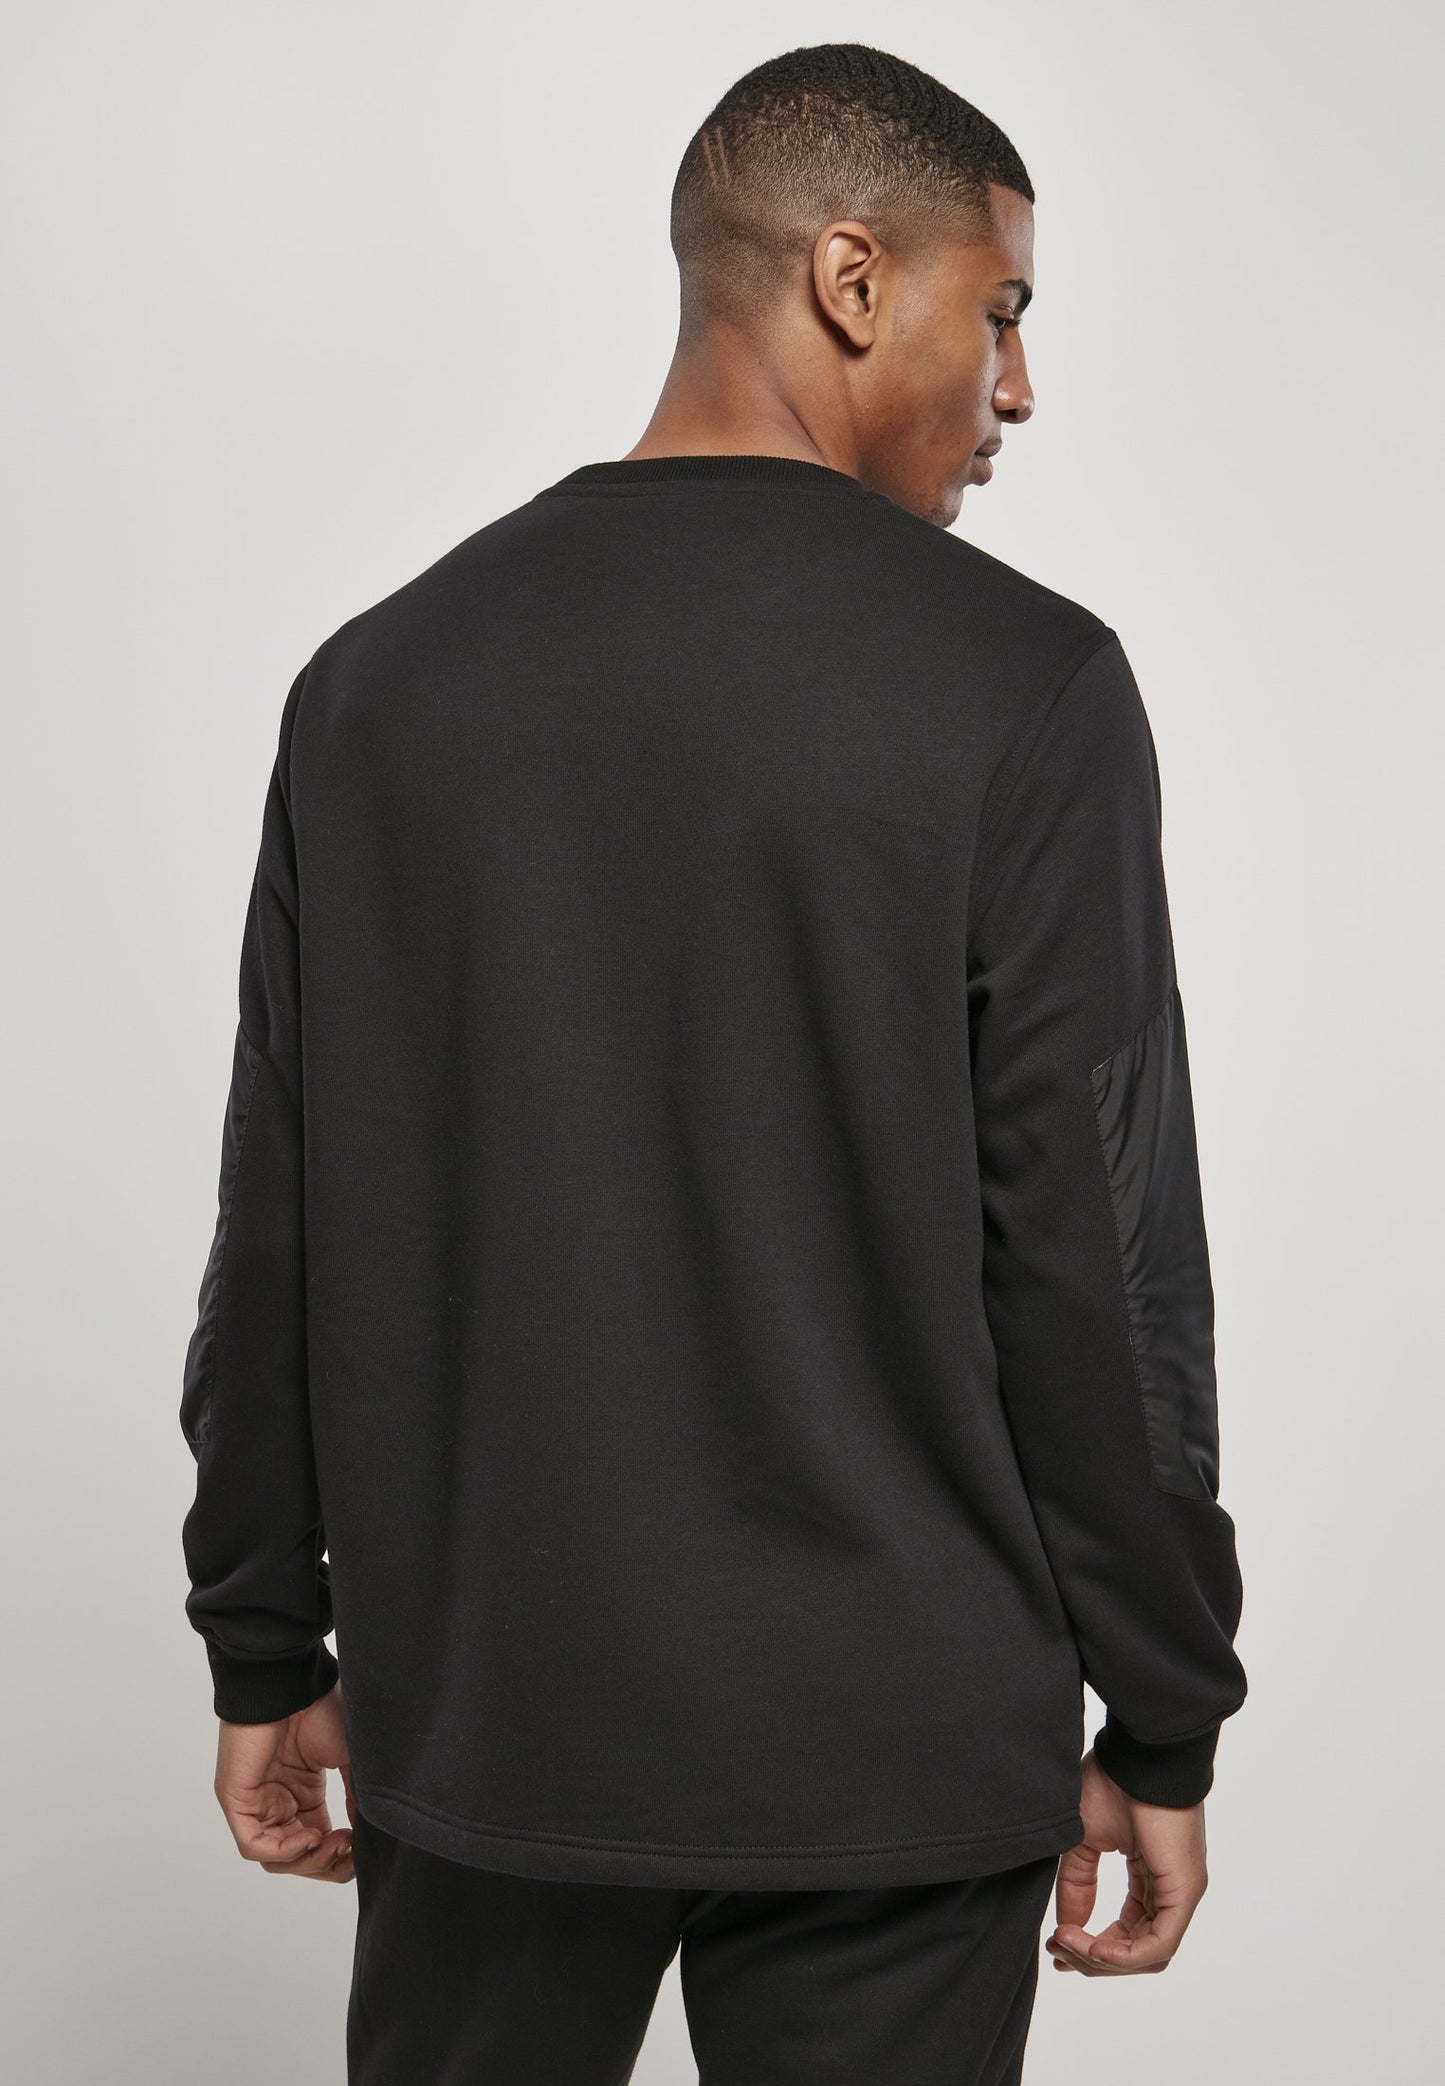 Starter Men's Black Long Sleeve Shirt: Casual Comfort with Style